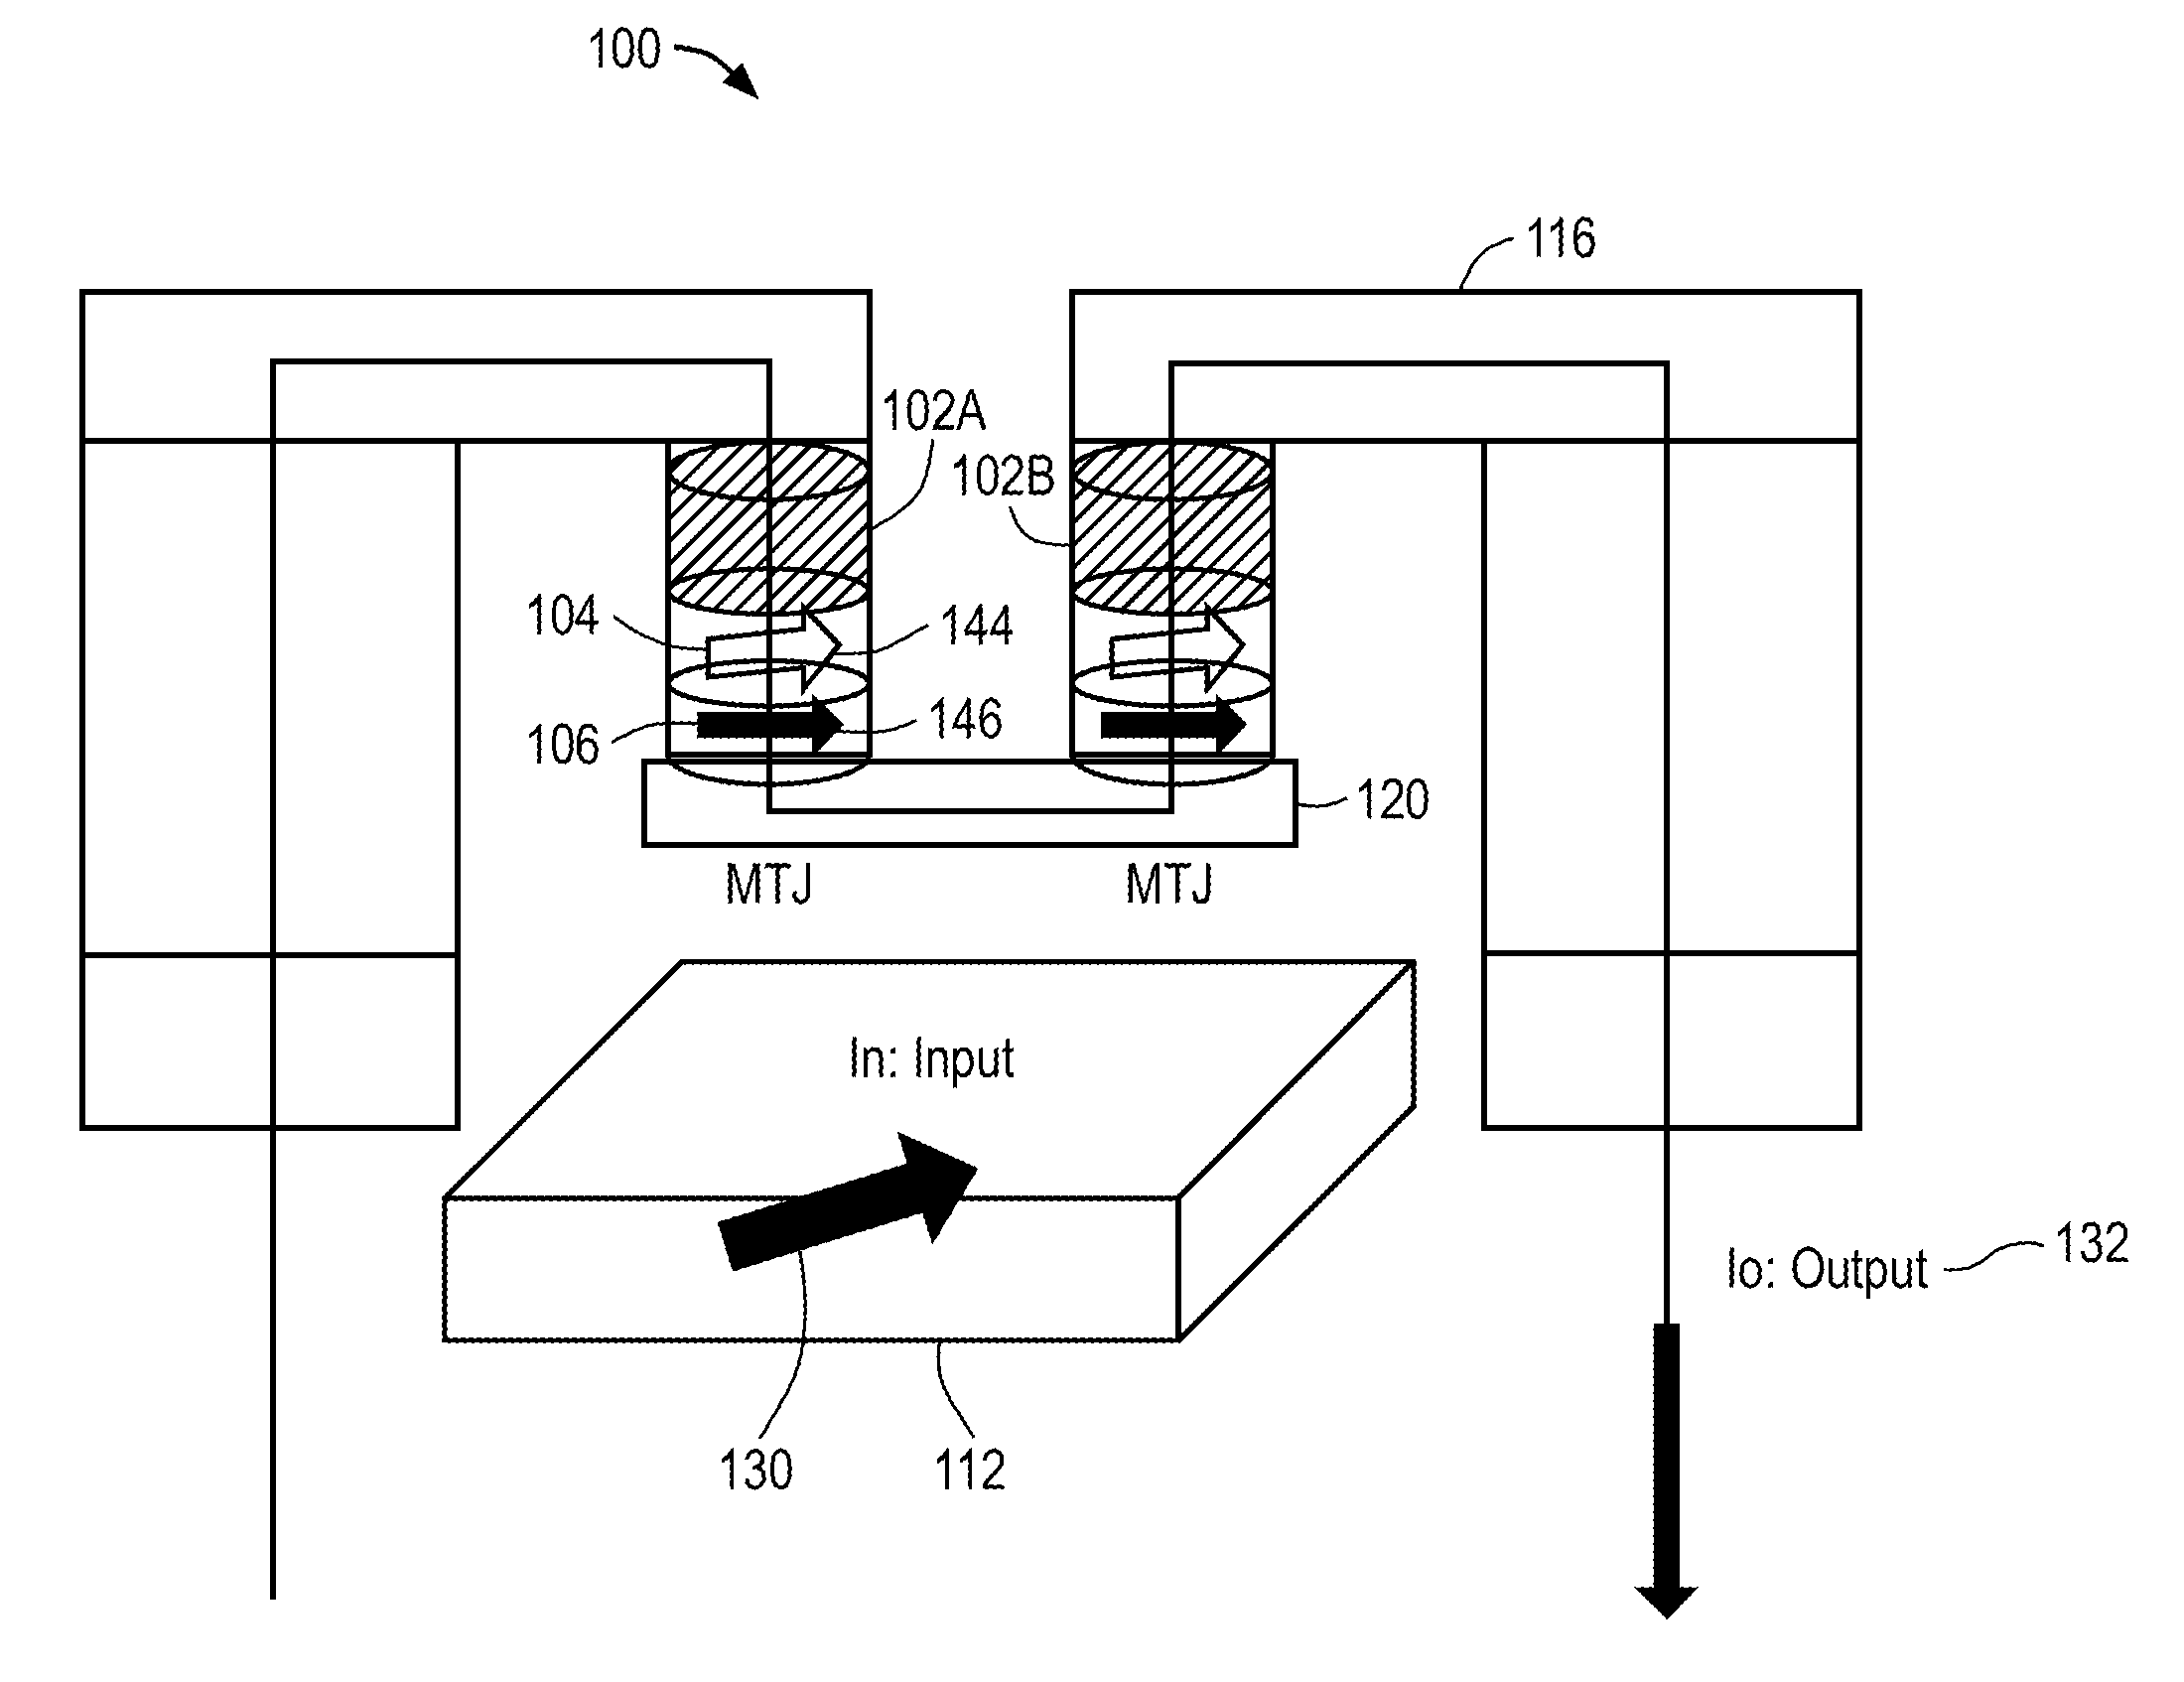 Magnetic logic units configured as an amplifier